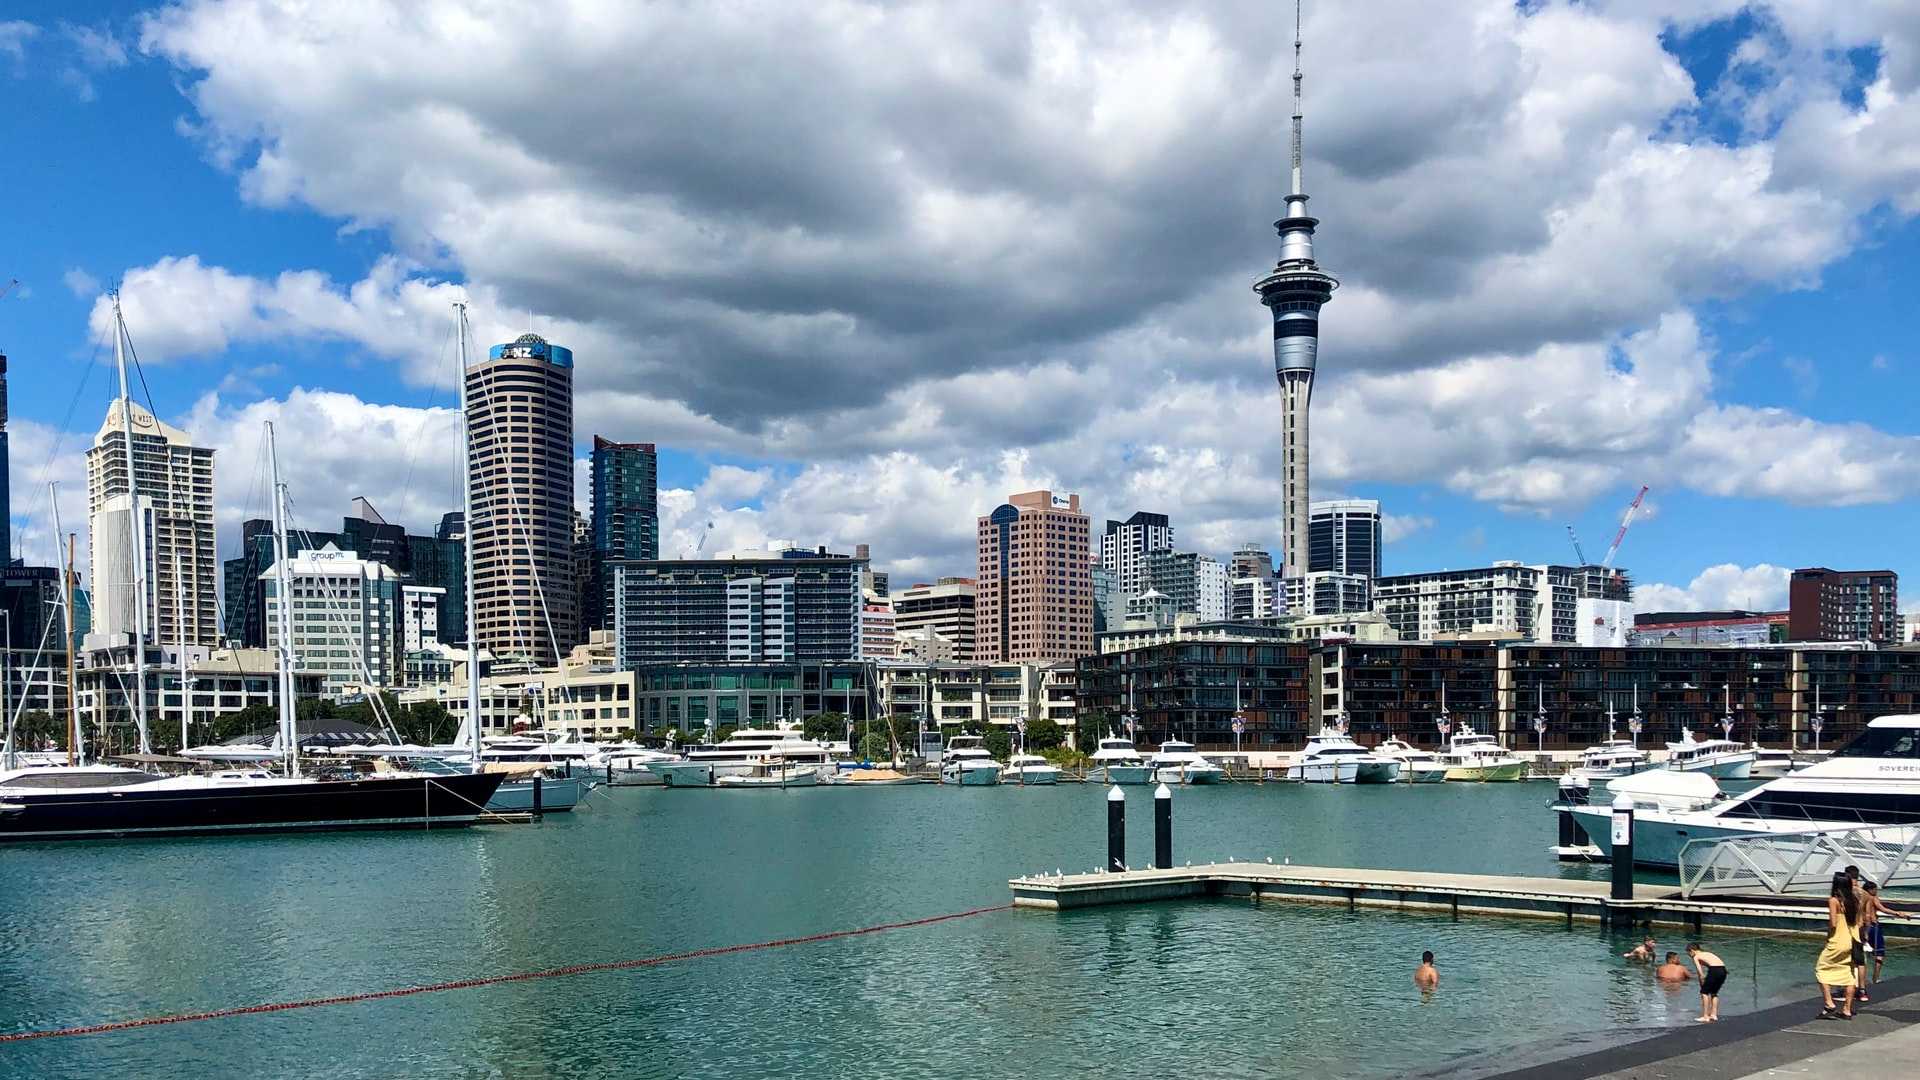 Five Rewarding Pit Stops to Make When You're Tackling the Auckland Viaduct